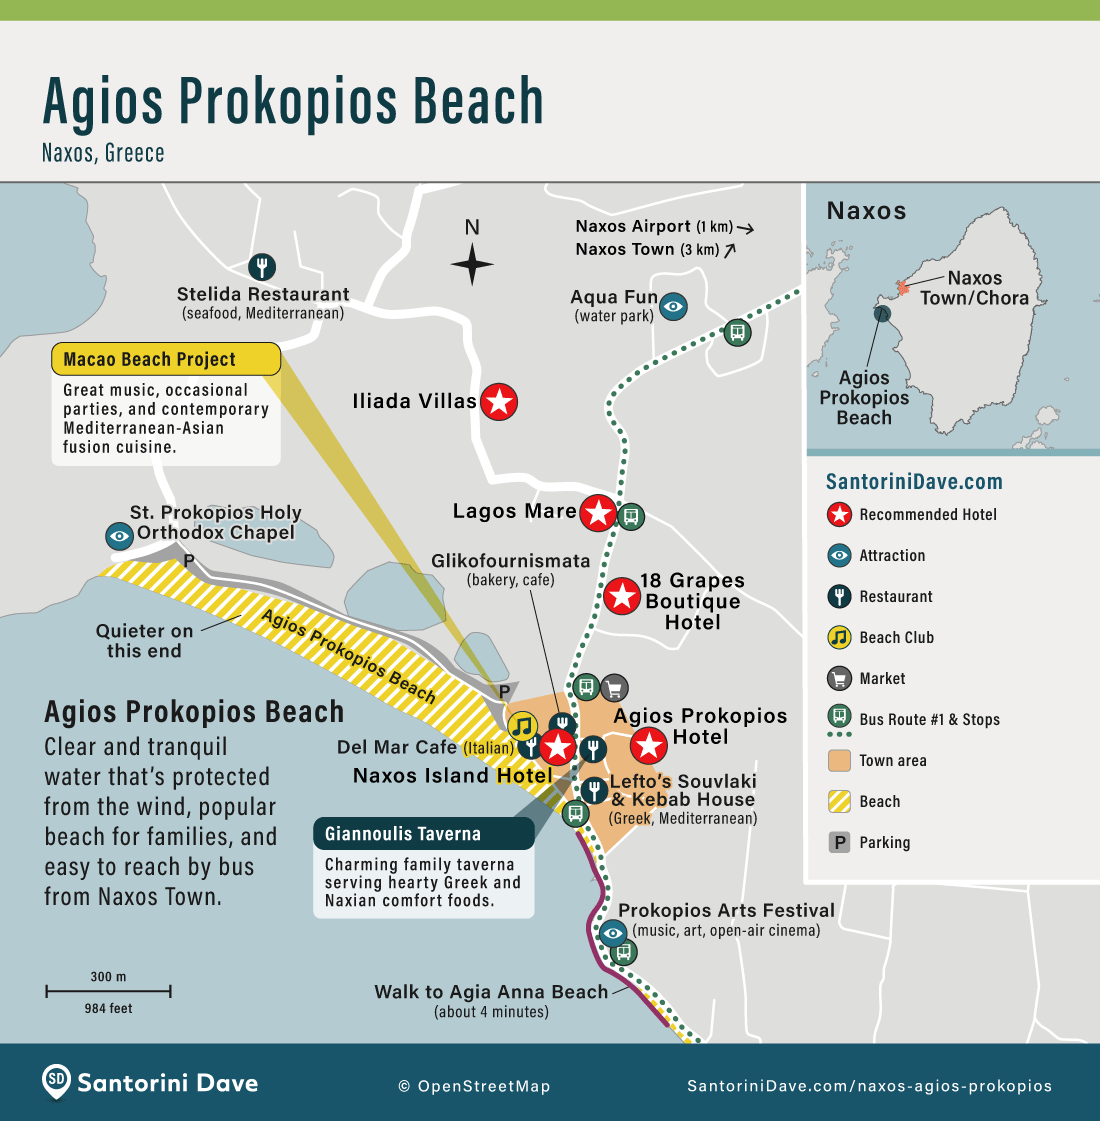 Map showing hotels, restaurants, and facilities at Agios Prokopios Beach on Naxos